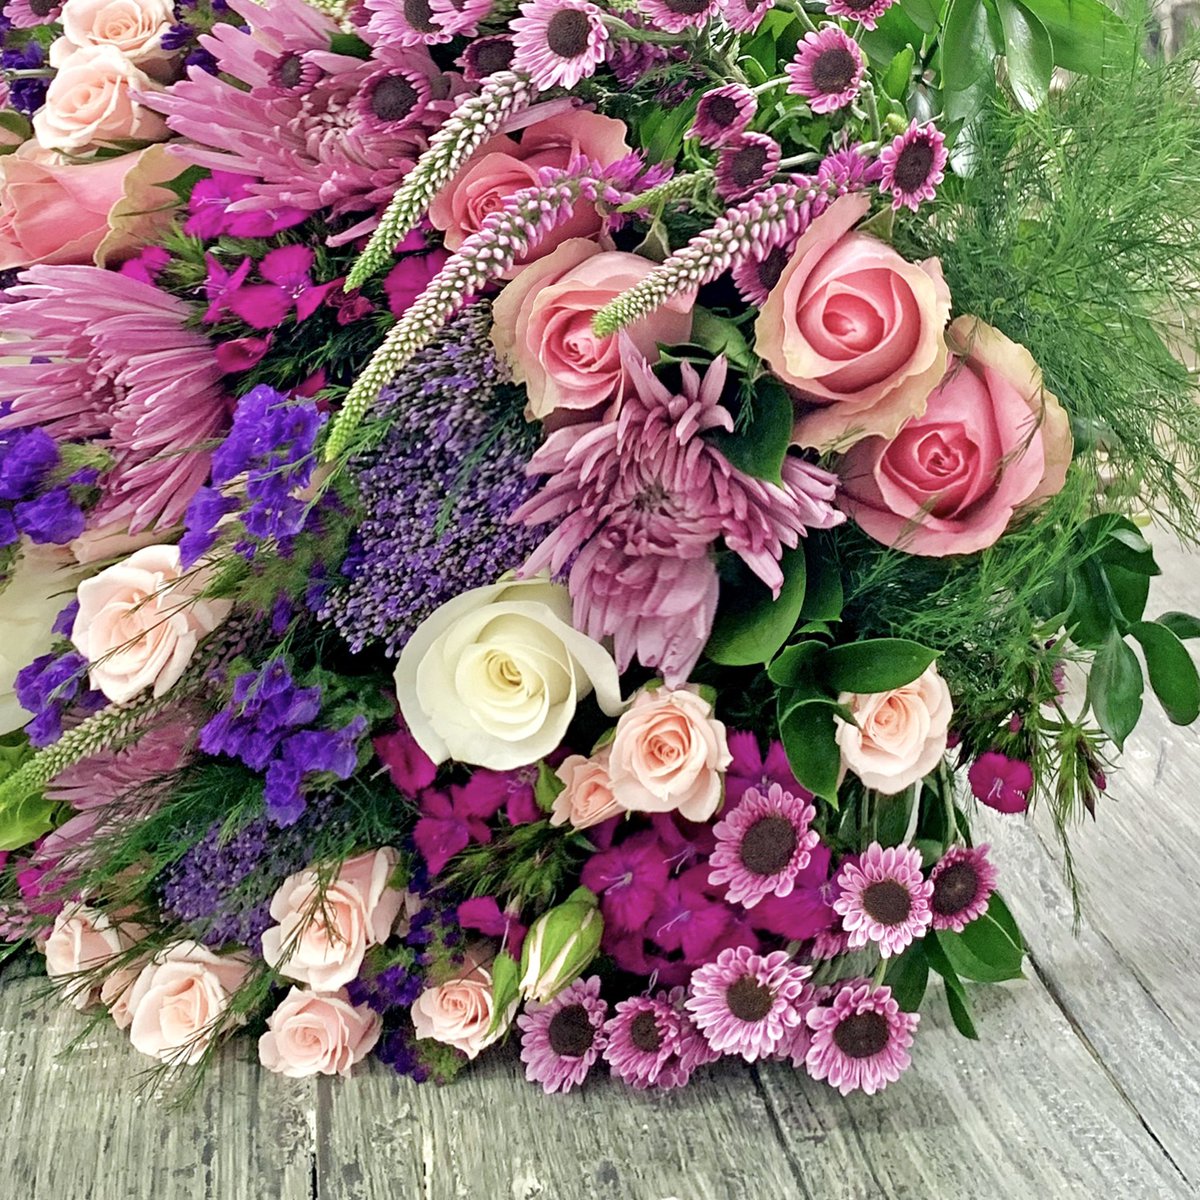 🌺 Happy international Woman’s day! If you're looking for high-quality fresh flowers, you've come to the right place! #simplicity #delicate #pastelcolors #bouquetofowers #cute #vintage #farminecuador #usa #ecuador #directshipping #lhf #lahaciendaflowers